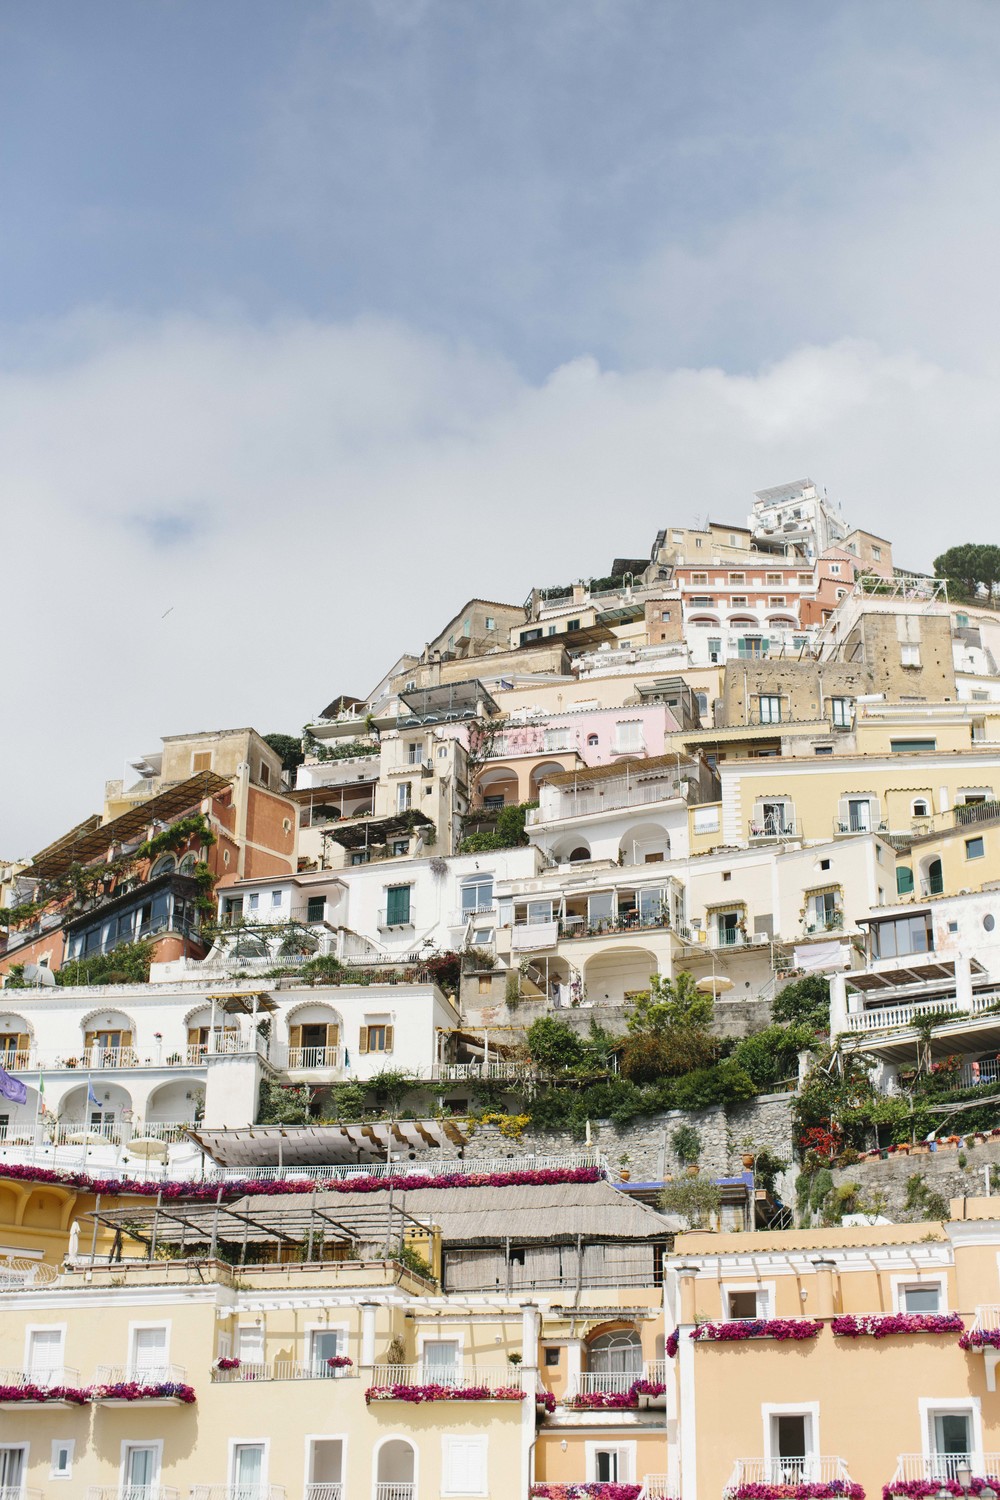 The buildings and houses of the Amalfi Coast are built right into the cliffs. Positano wowed us with its beautiful colors.